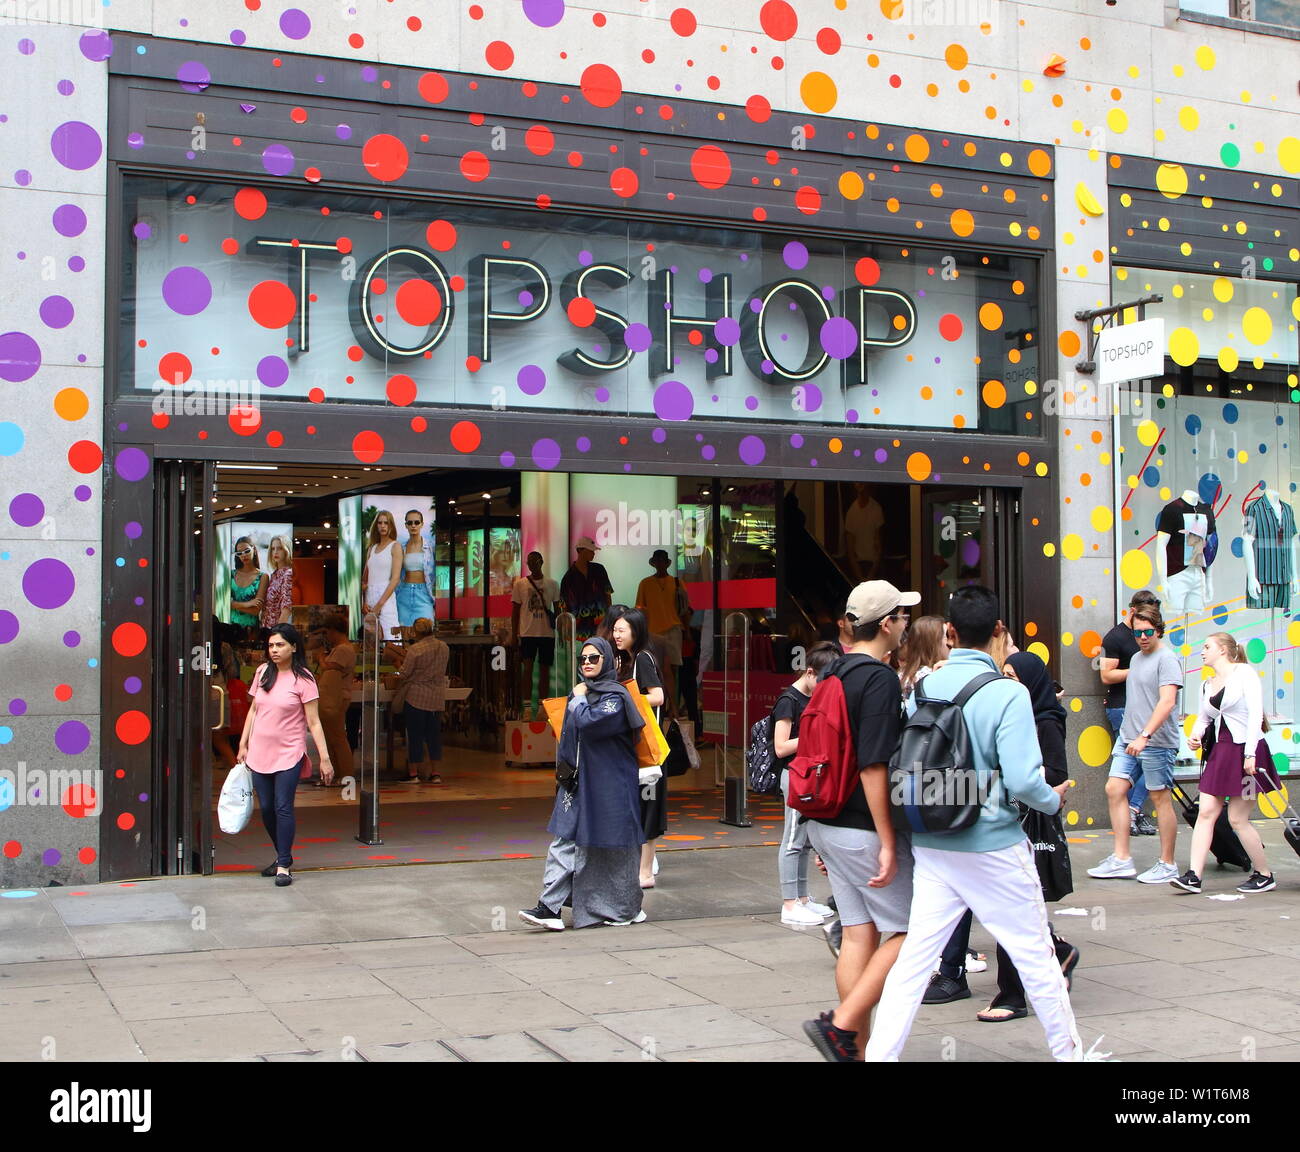 Topshop and Topman stores seen being covered with rainbow bubbles.Many  retail stores in the capital's shopping heartland of the West End are  currently decorated in rainbow colours, supporting Pride. An annual  celebration